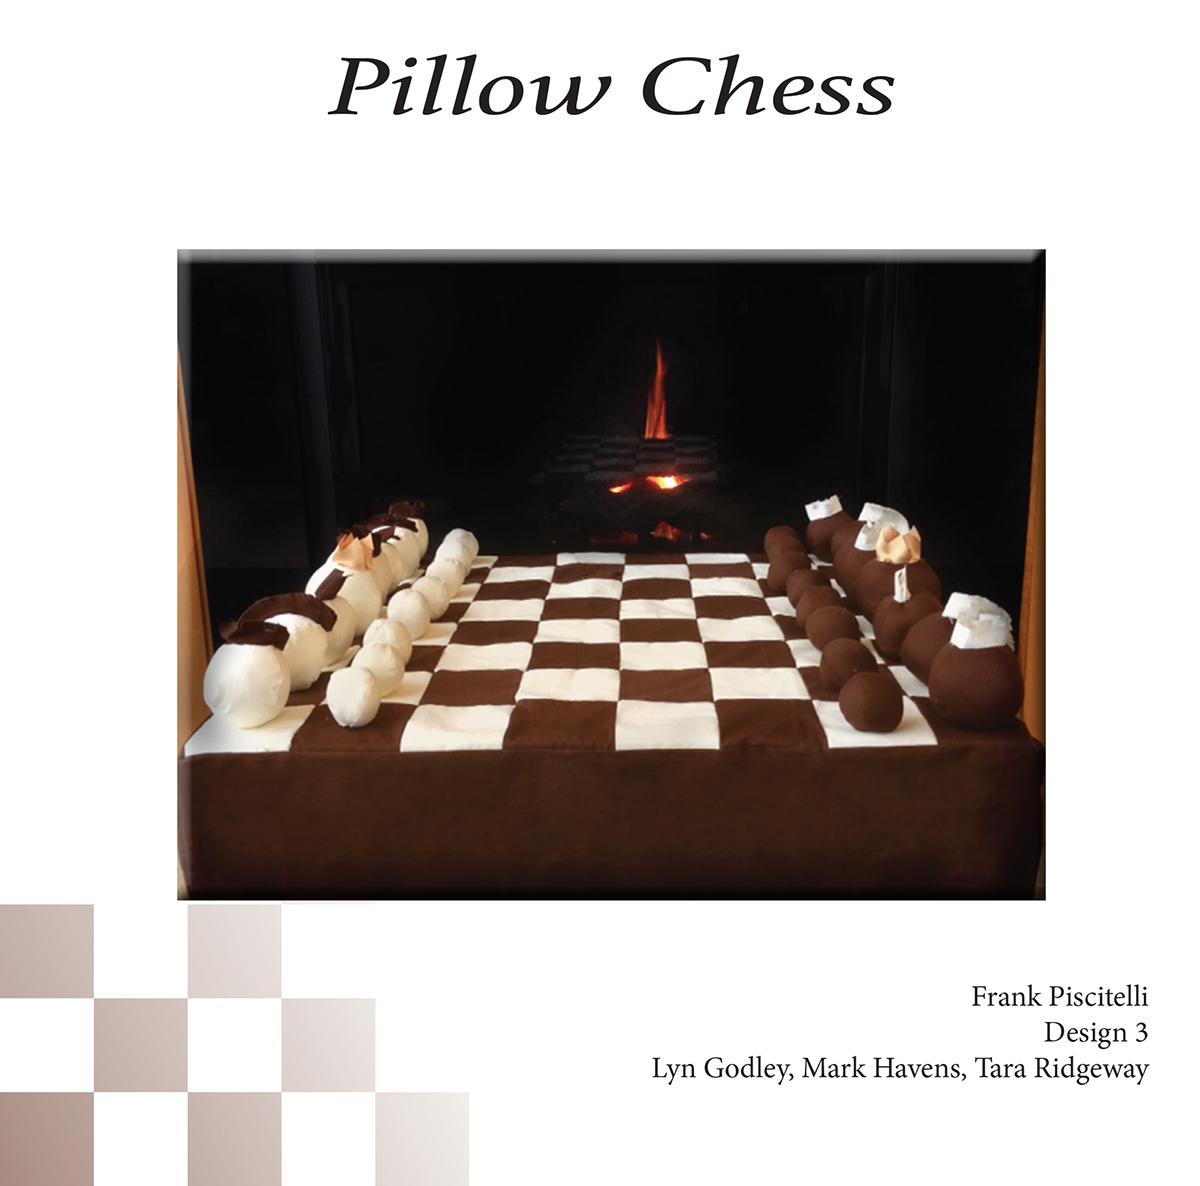 pillow chess Pillow Chess SEW Pawn bishop king queen rook knight Castle horse